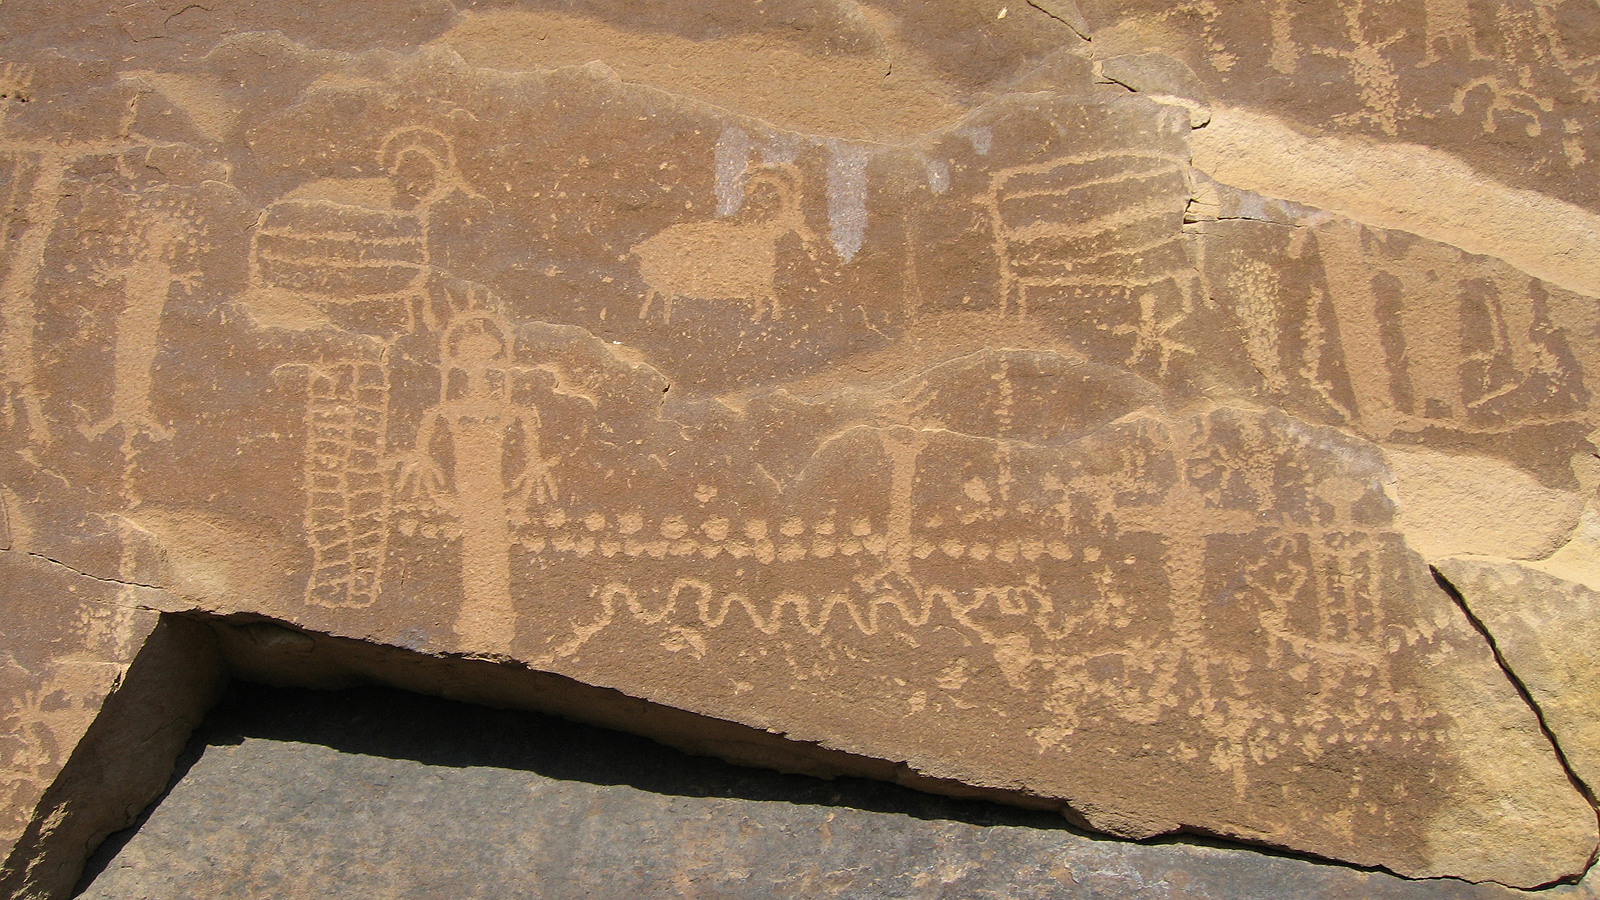 Pictographs on the Green River in Desolation Canyon